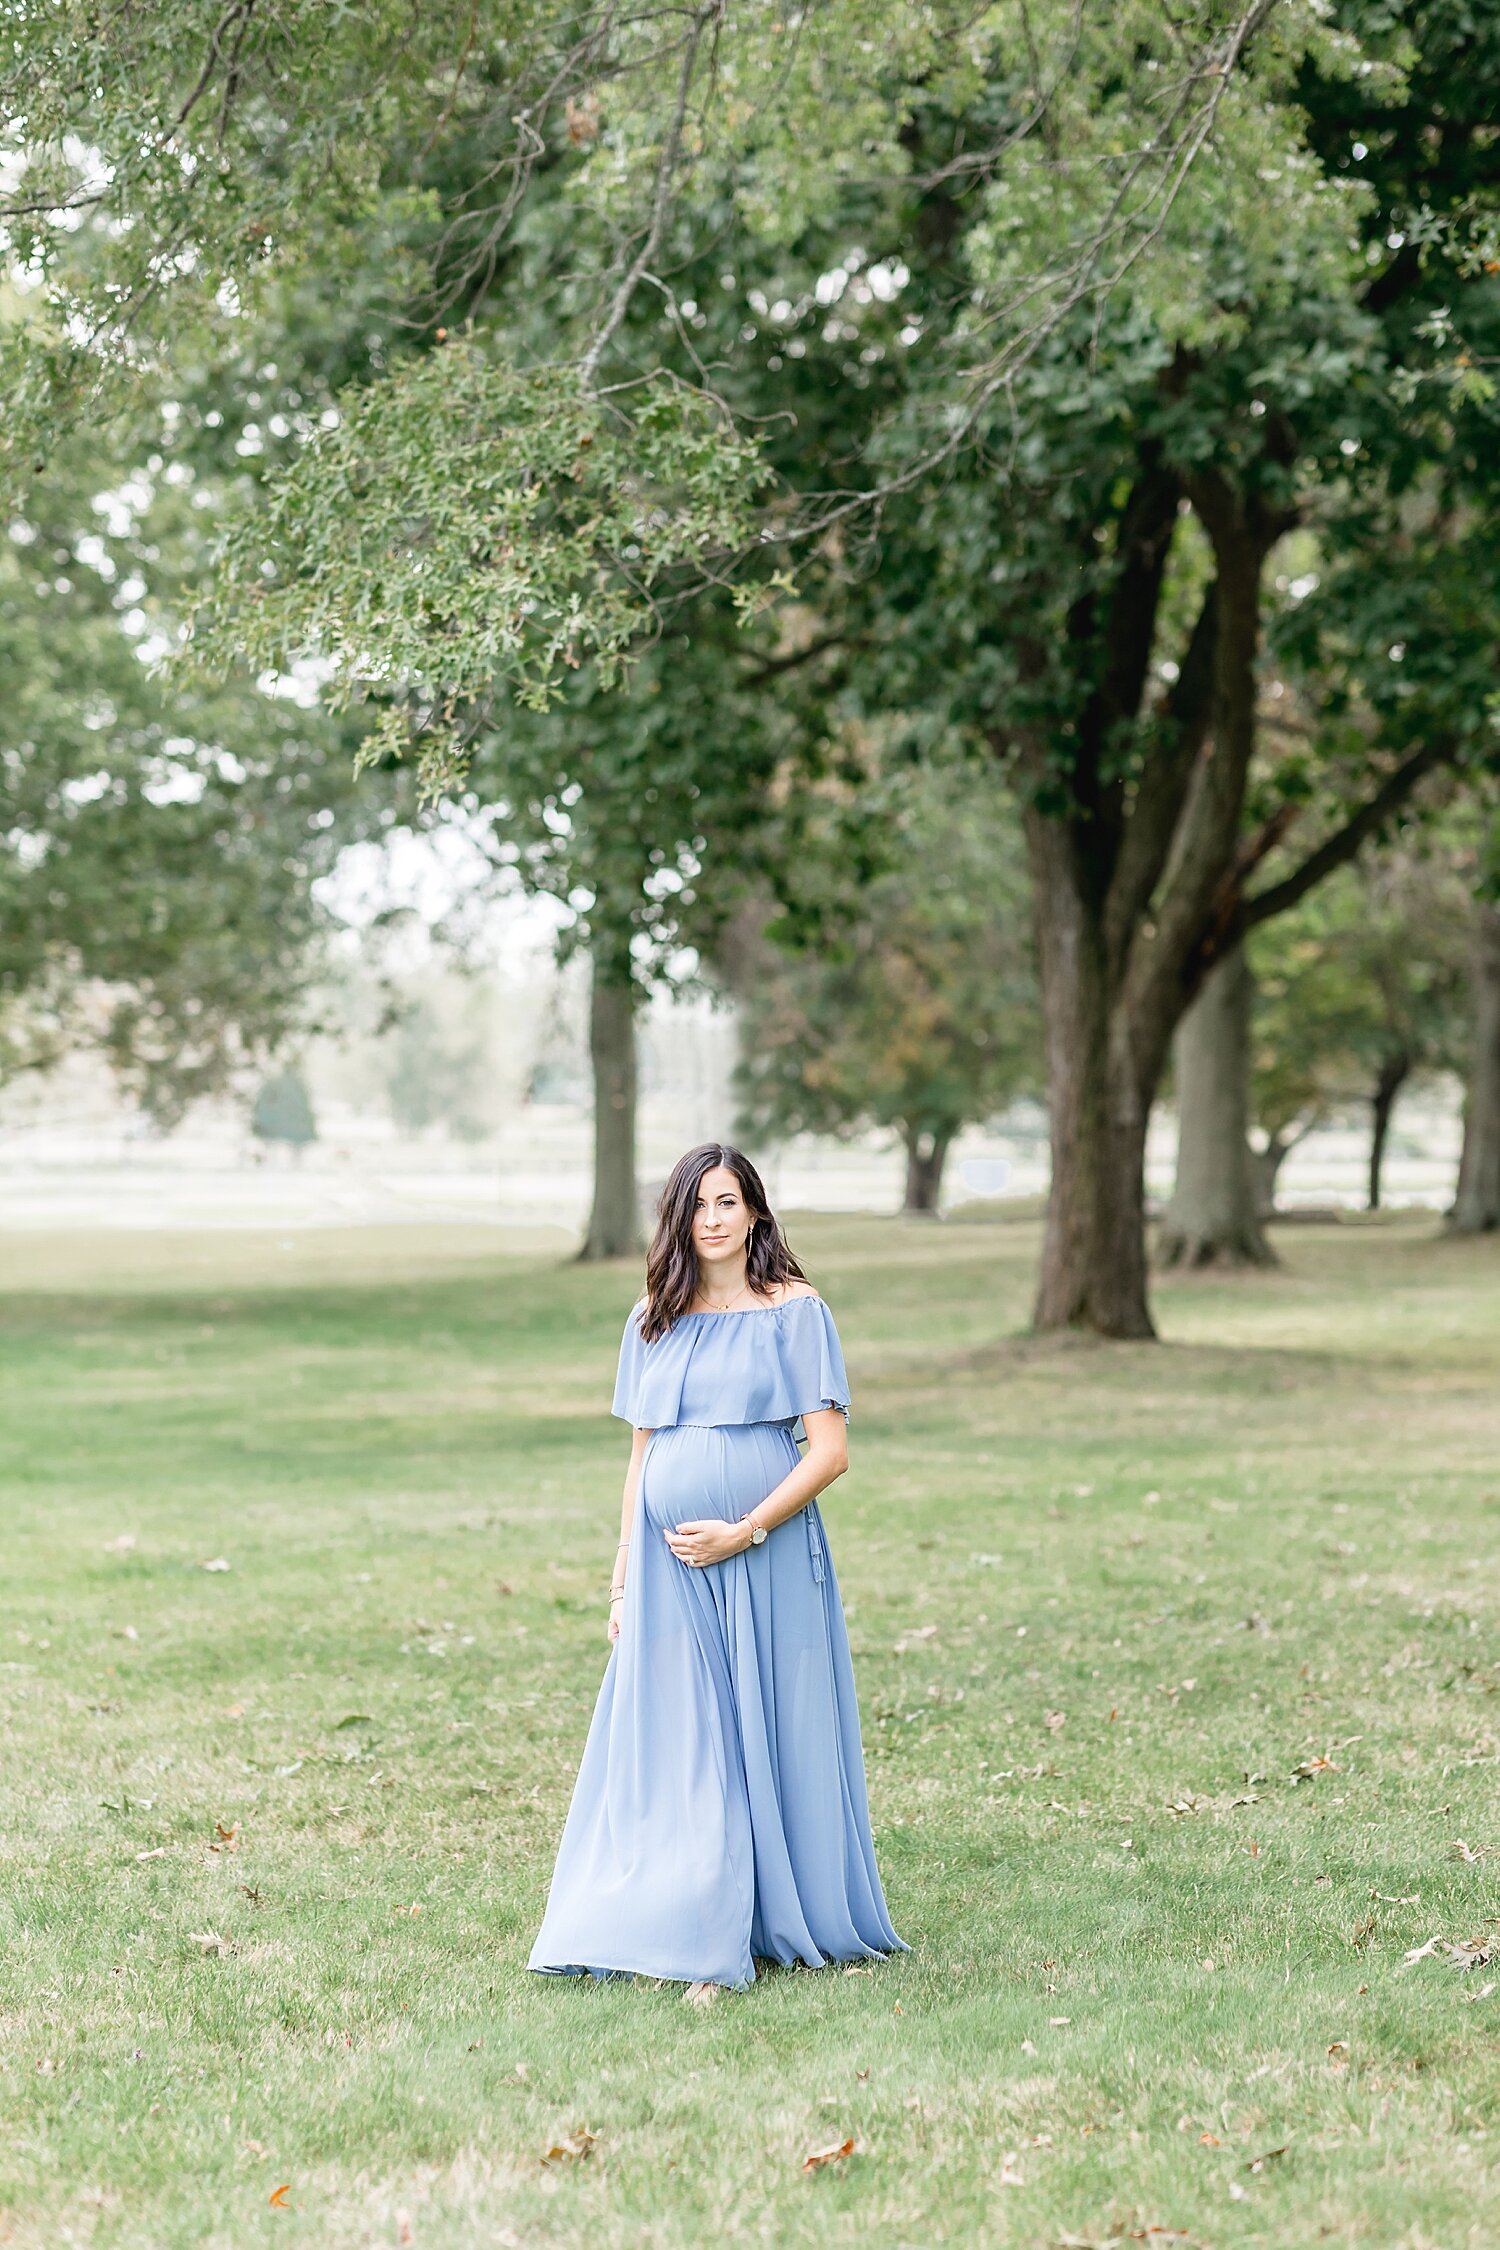 Mama during her maternity session in a long blue dress at Sherwood Island Park in Westport, CT. Photos by Kristin Wood Photography.